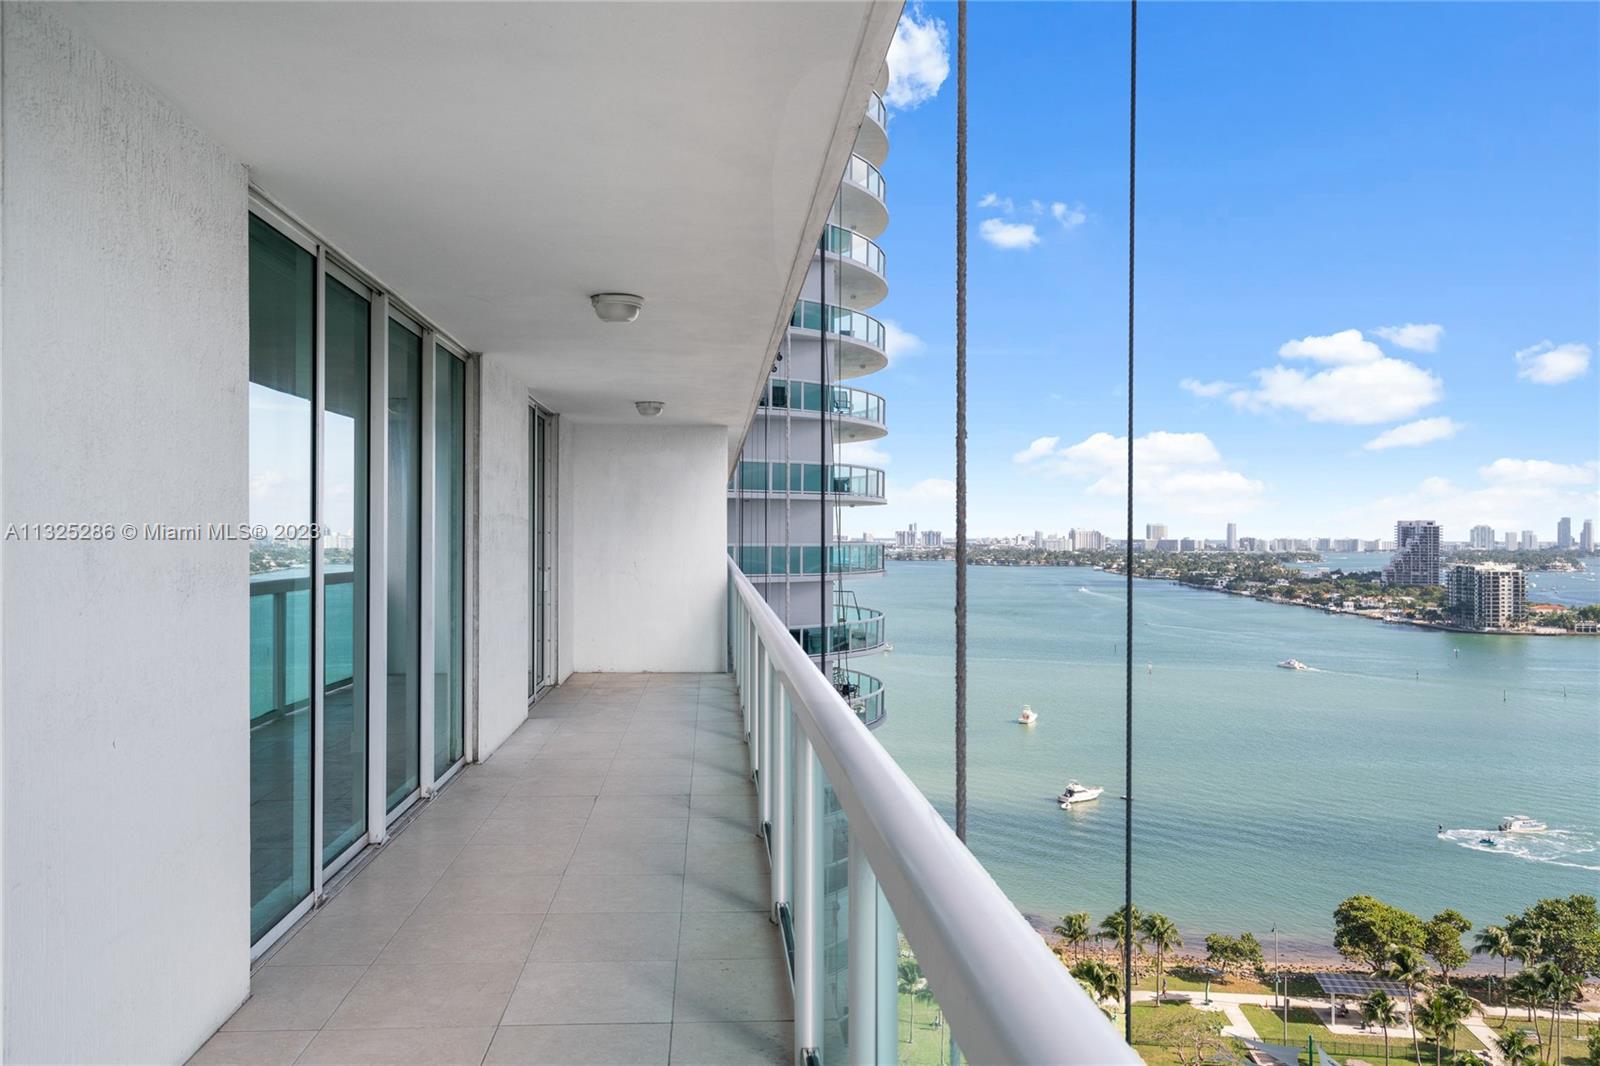 Enjoy Bay & City views from these 2 bed / 2 baths unit featuring a split floor plan, two master bedrooms with walk-in closets, tile flooring throughout and marble in bathrooms. 1800 Club Miami offers a variety of amenities for its
residents, including a state-of-the-art fitness center, co-ed sauna and steam room, massage room, heated
swimming pool, hot tub, party room, 24-hour concierge, 24-hour security, and 24-hour valet parking. 1800 Club is
located directly across the street from Margaret Pace Park which has tennis courts, a basketball court, a children’s
playground, a volleyball court, a dog park, and tons of open green space.